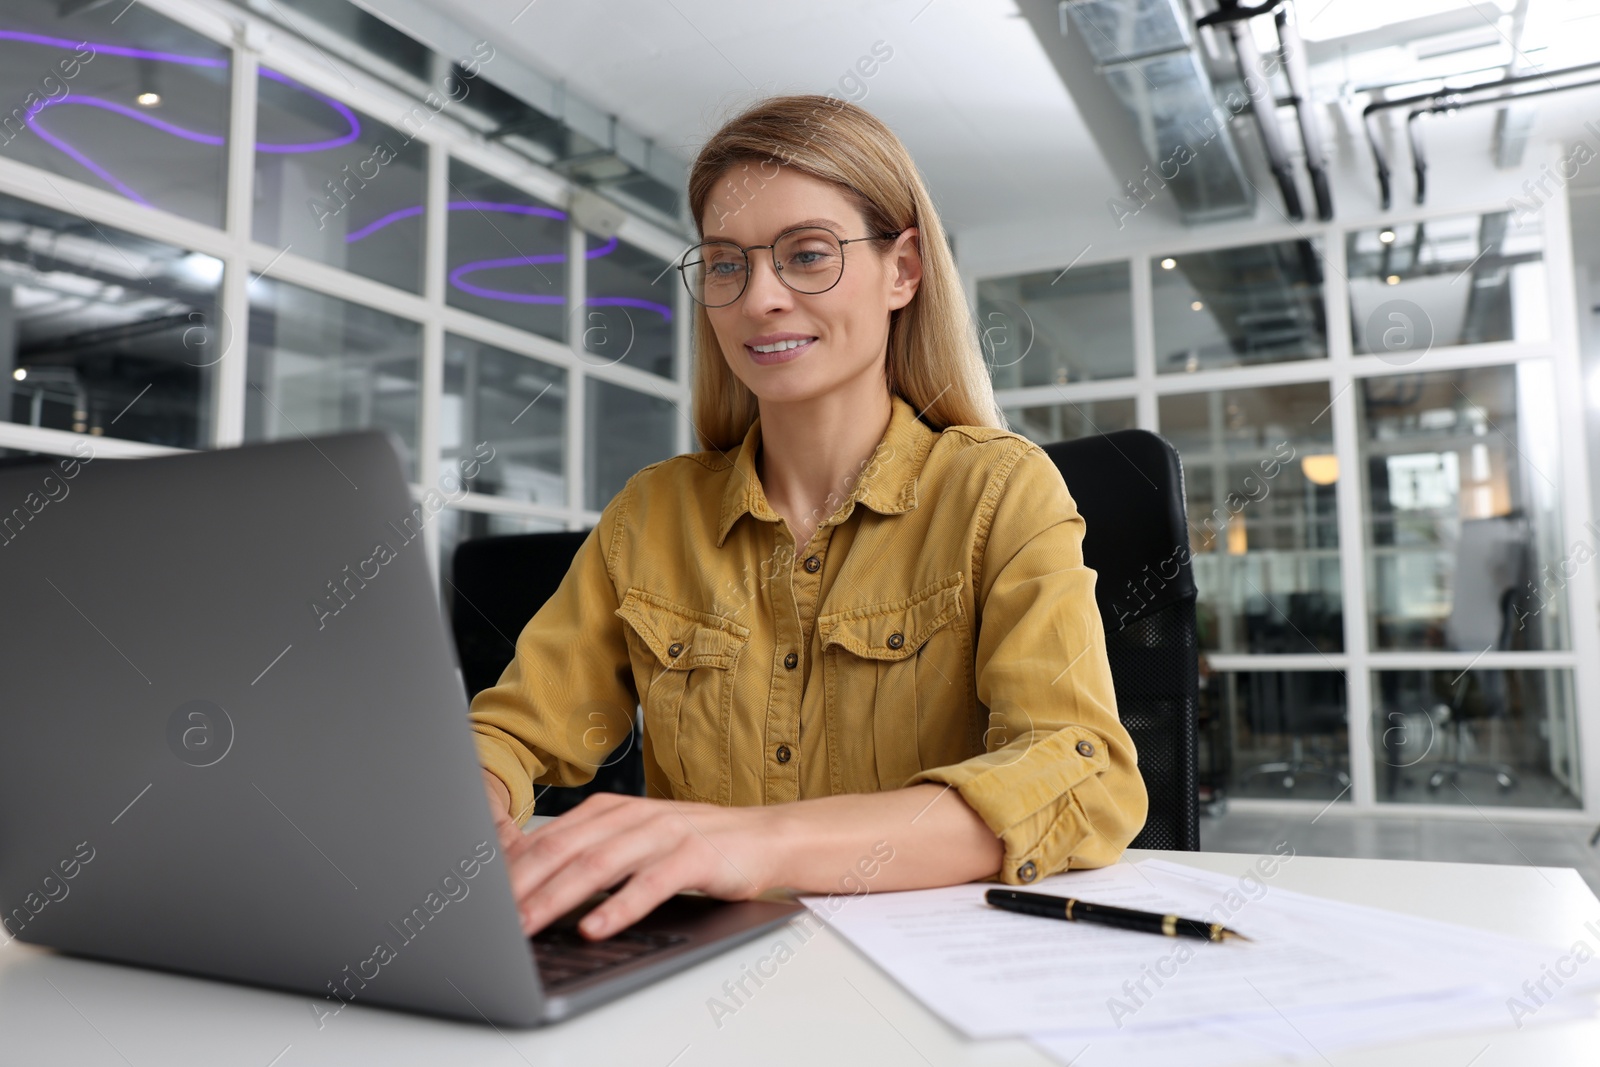 Photo of Woman working on laptop at white desk in office